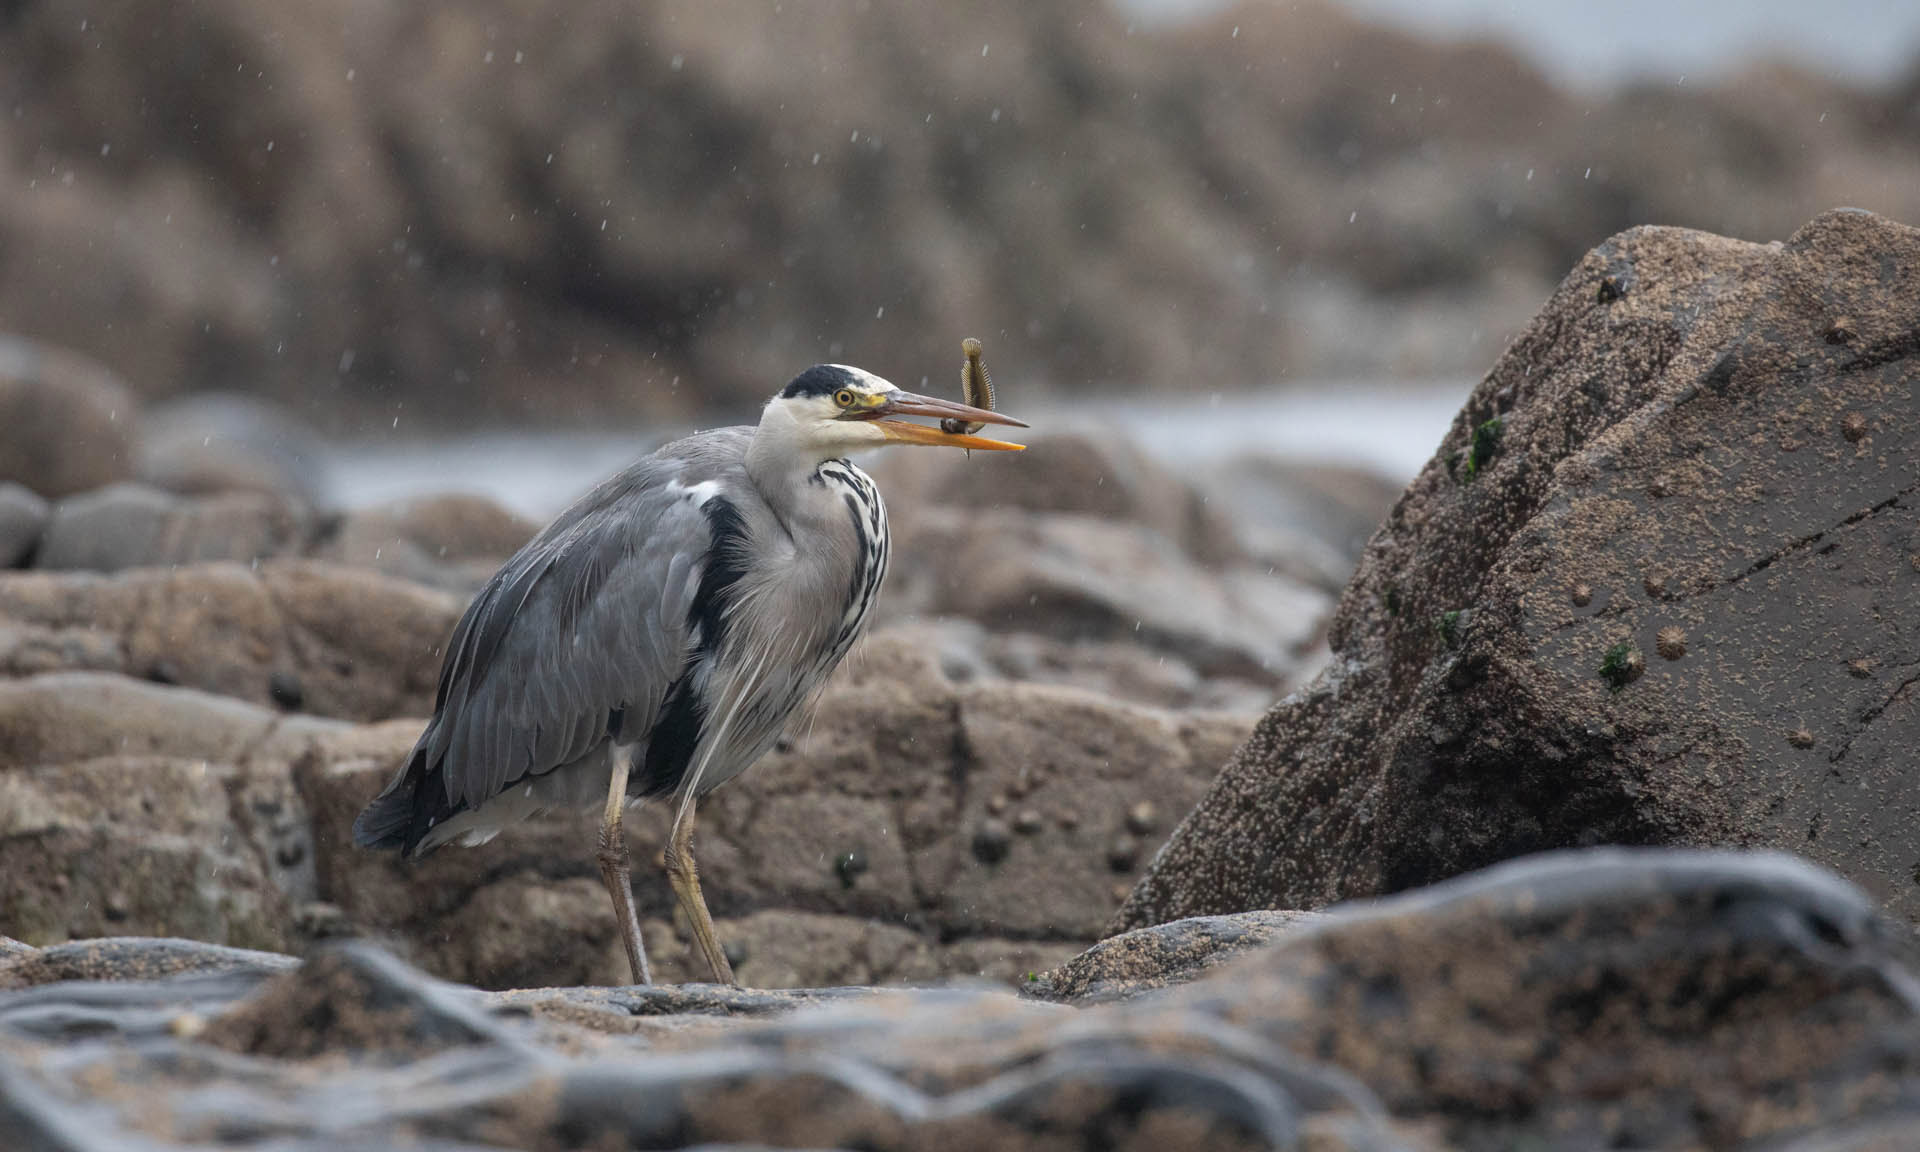 A grey heron with a fish in its beak